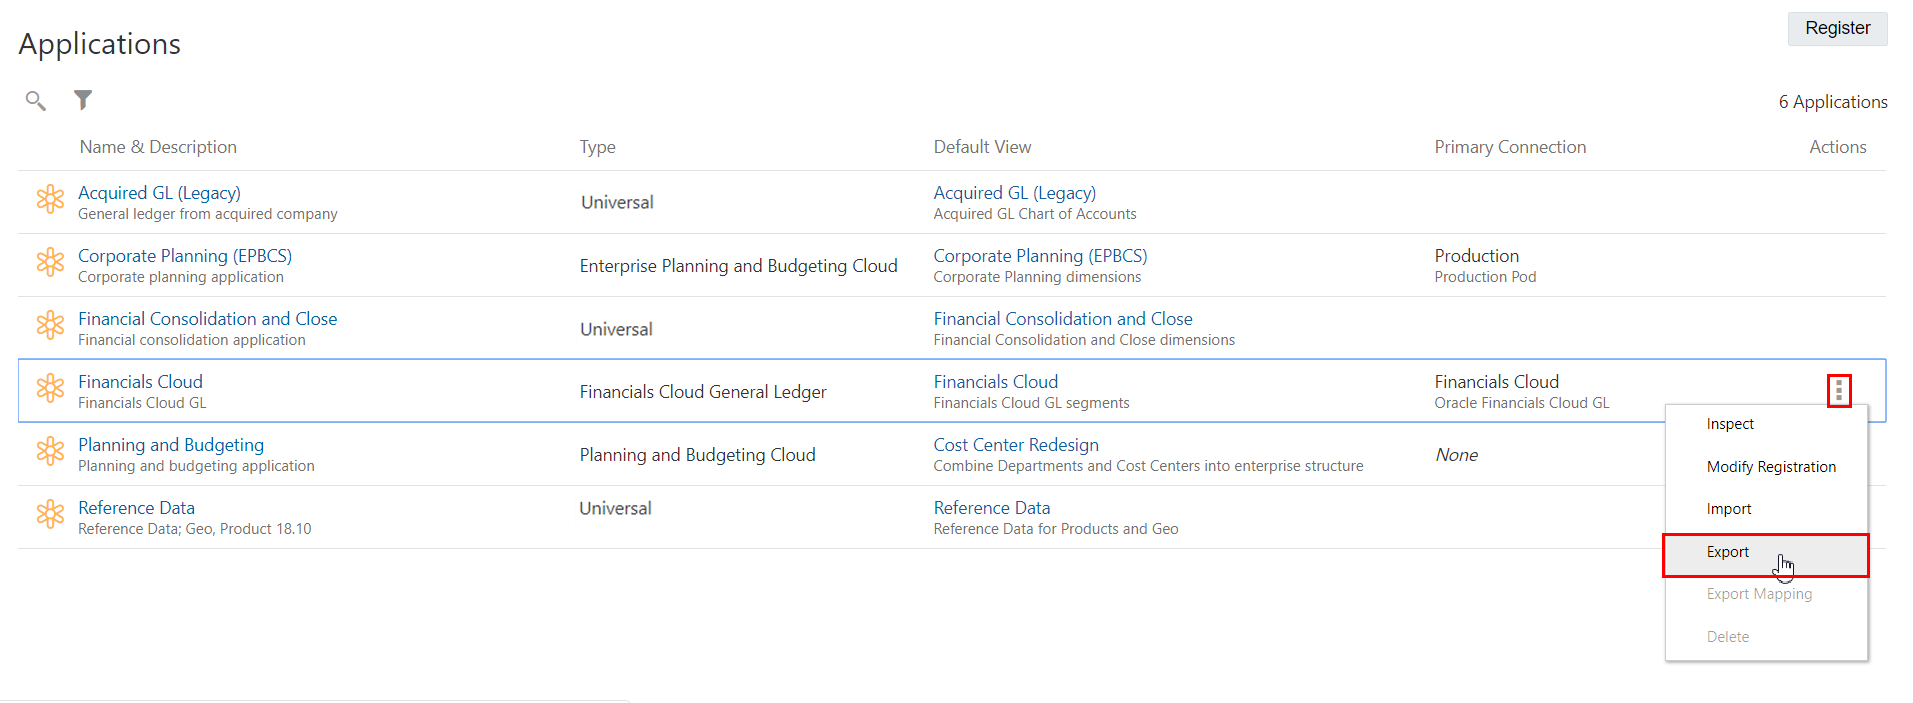 screenshot shows Financials Cloud application with Export button highlighted